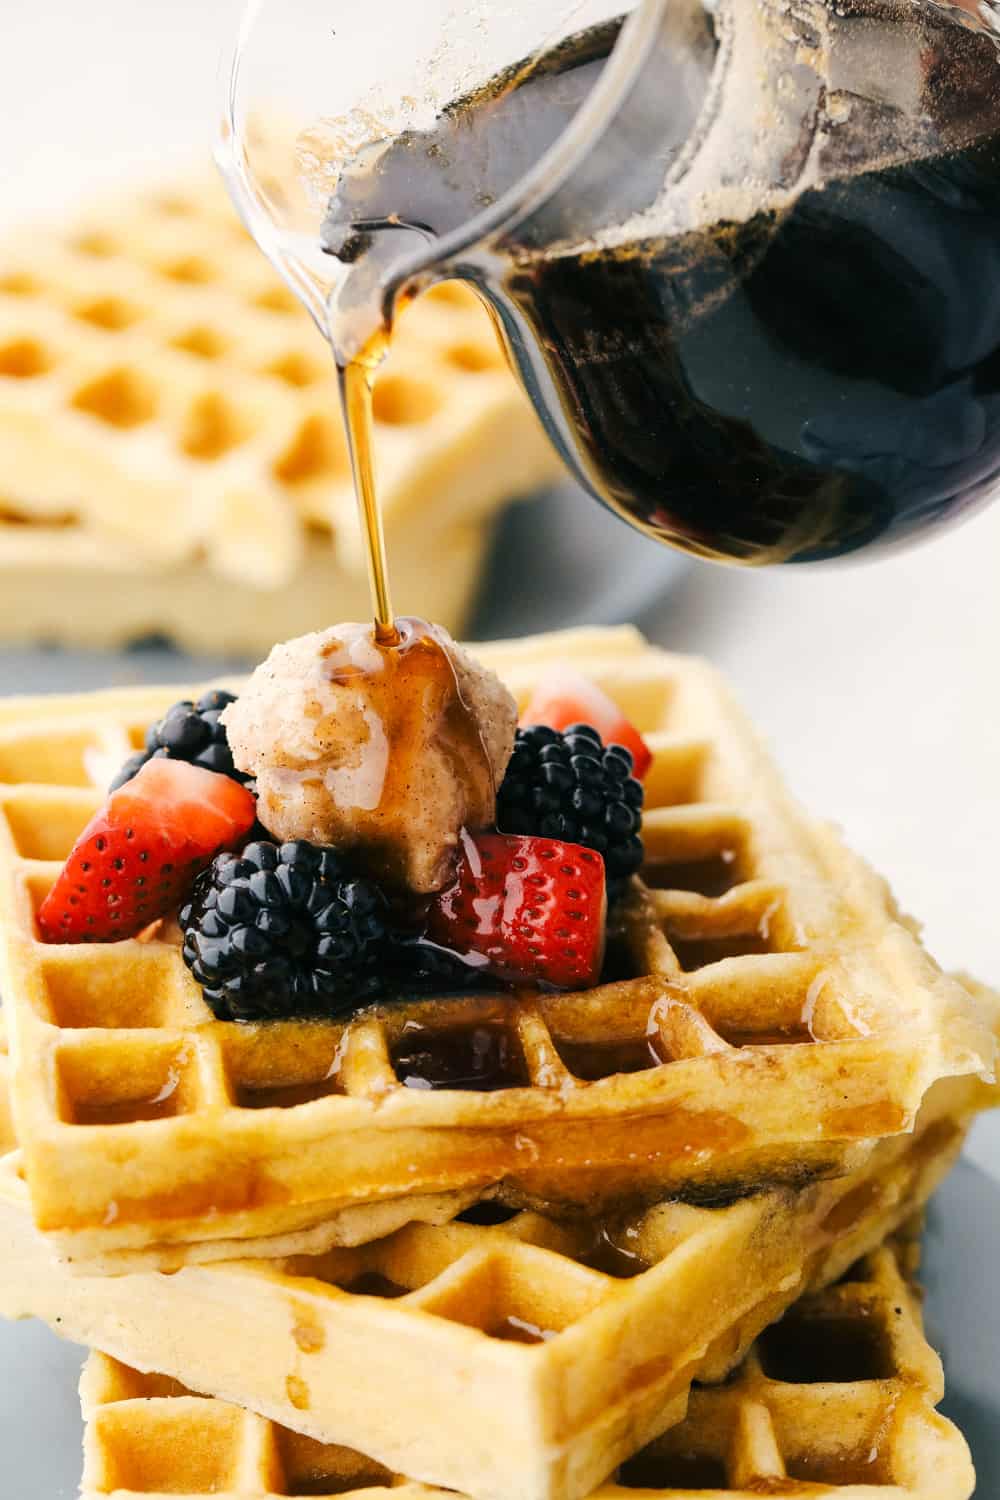 Pouring maple syrup over waffles. 